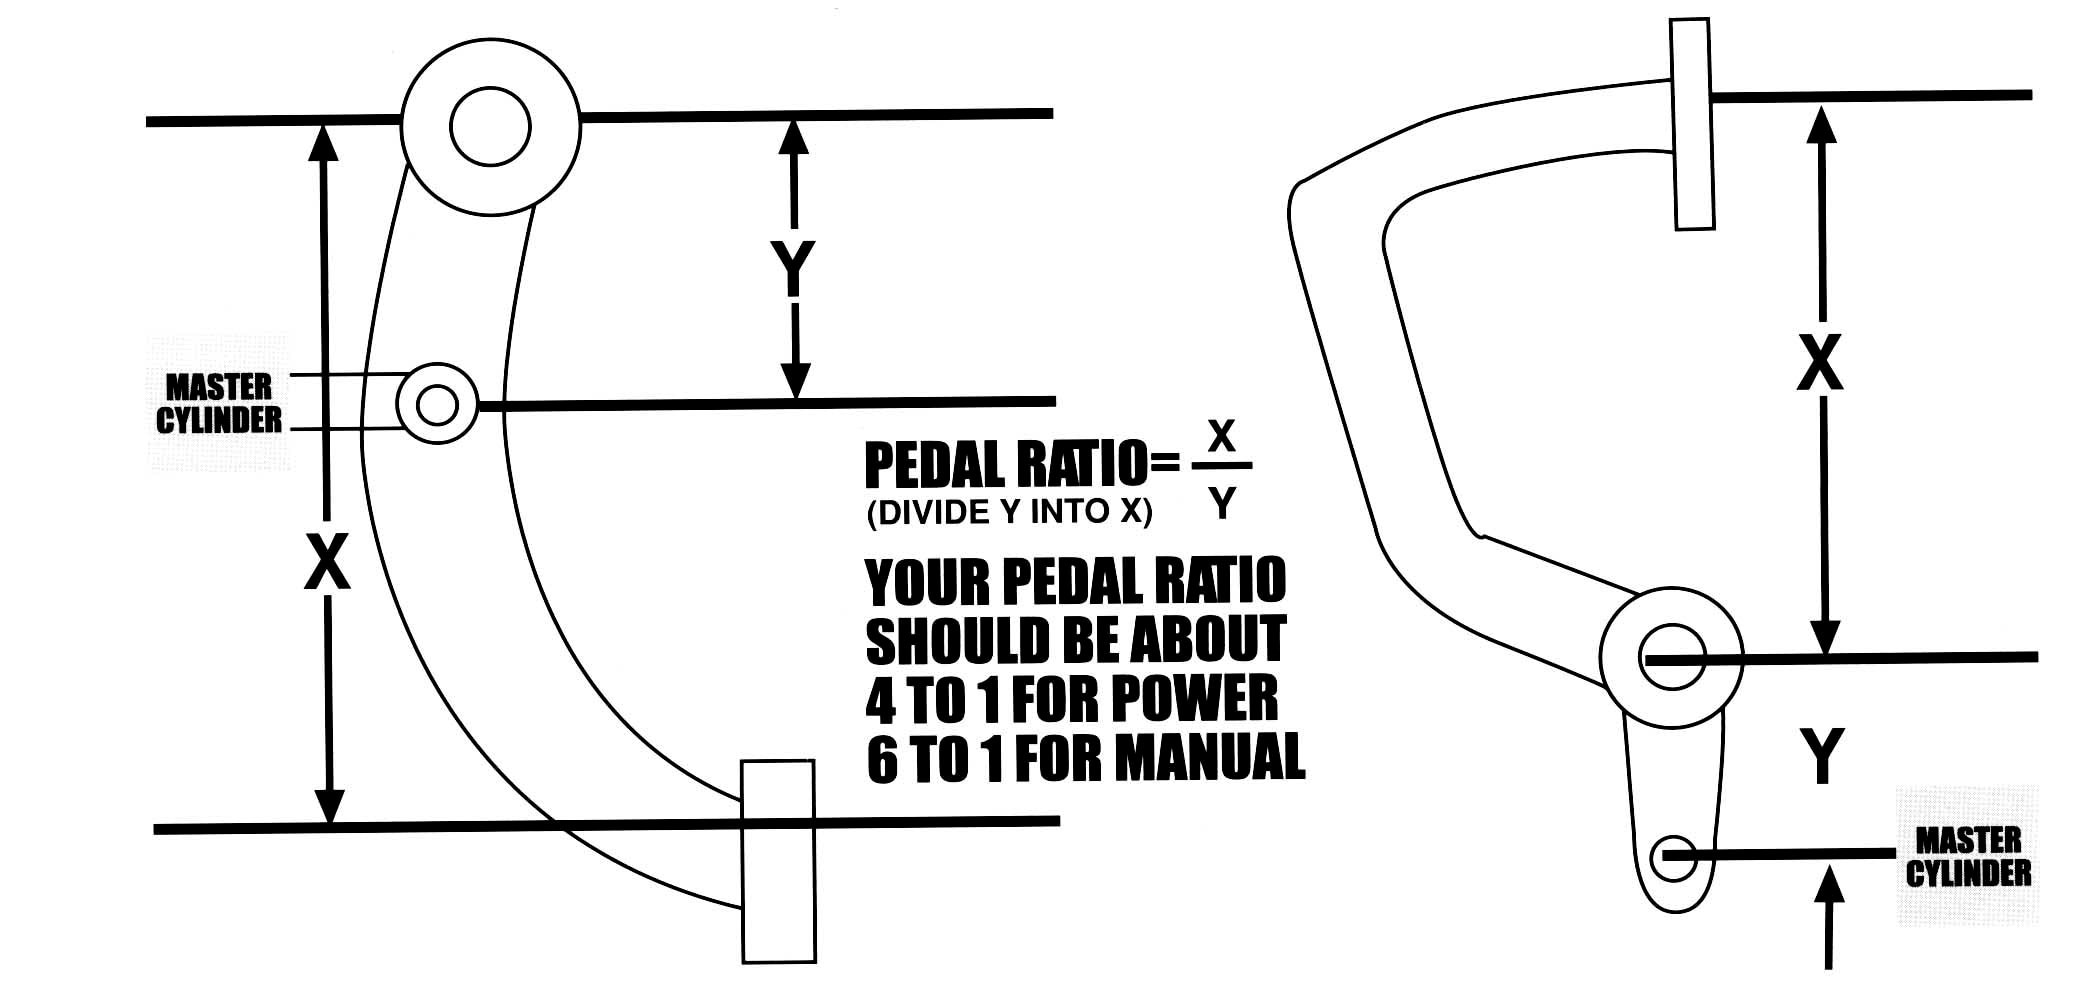 Truck Brake System Diagram Selecting and Installing Brake System Ponents Proper Plumbing Of Truck Brake System Diagram